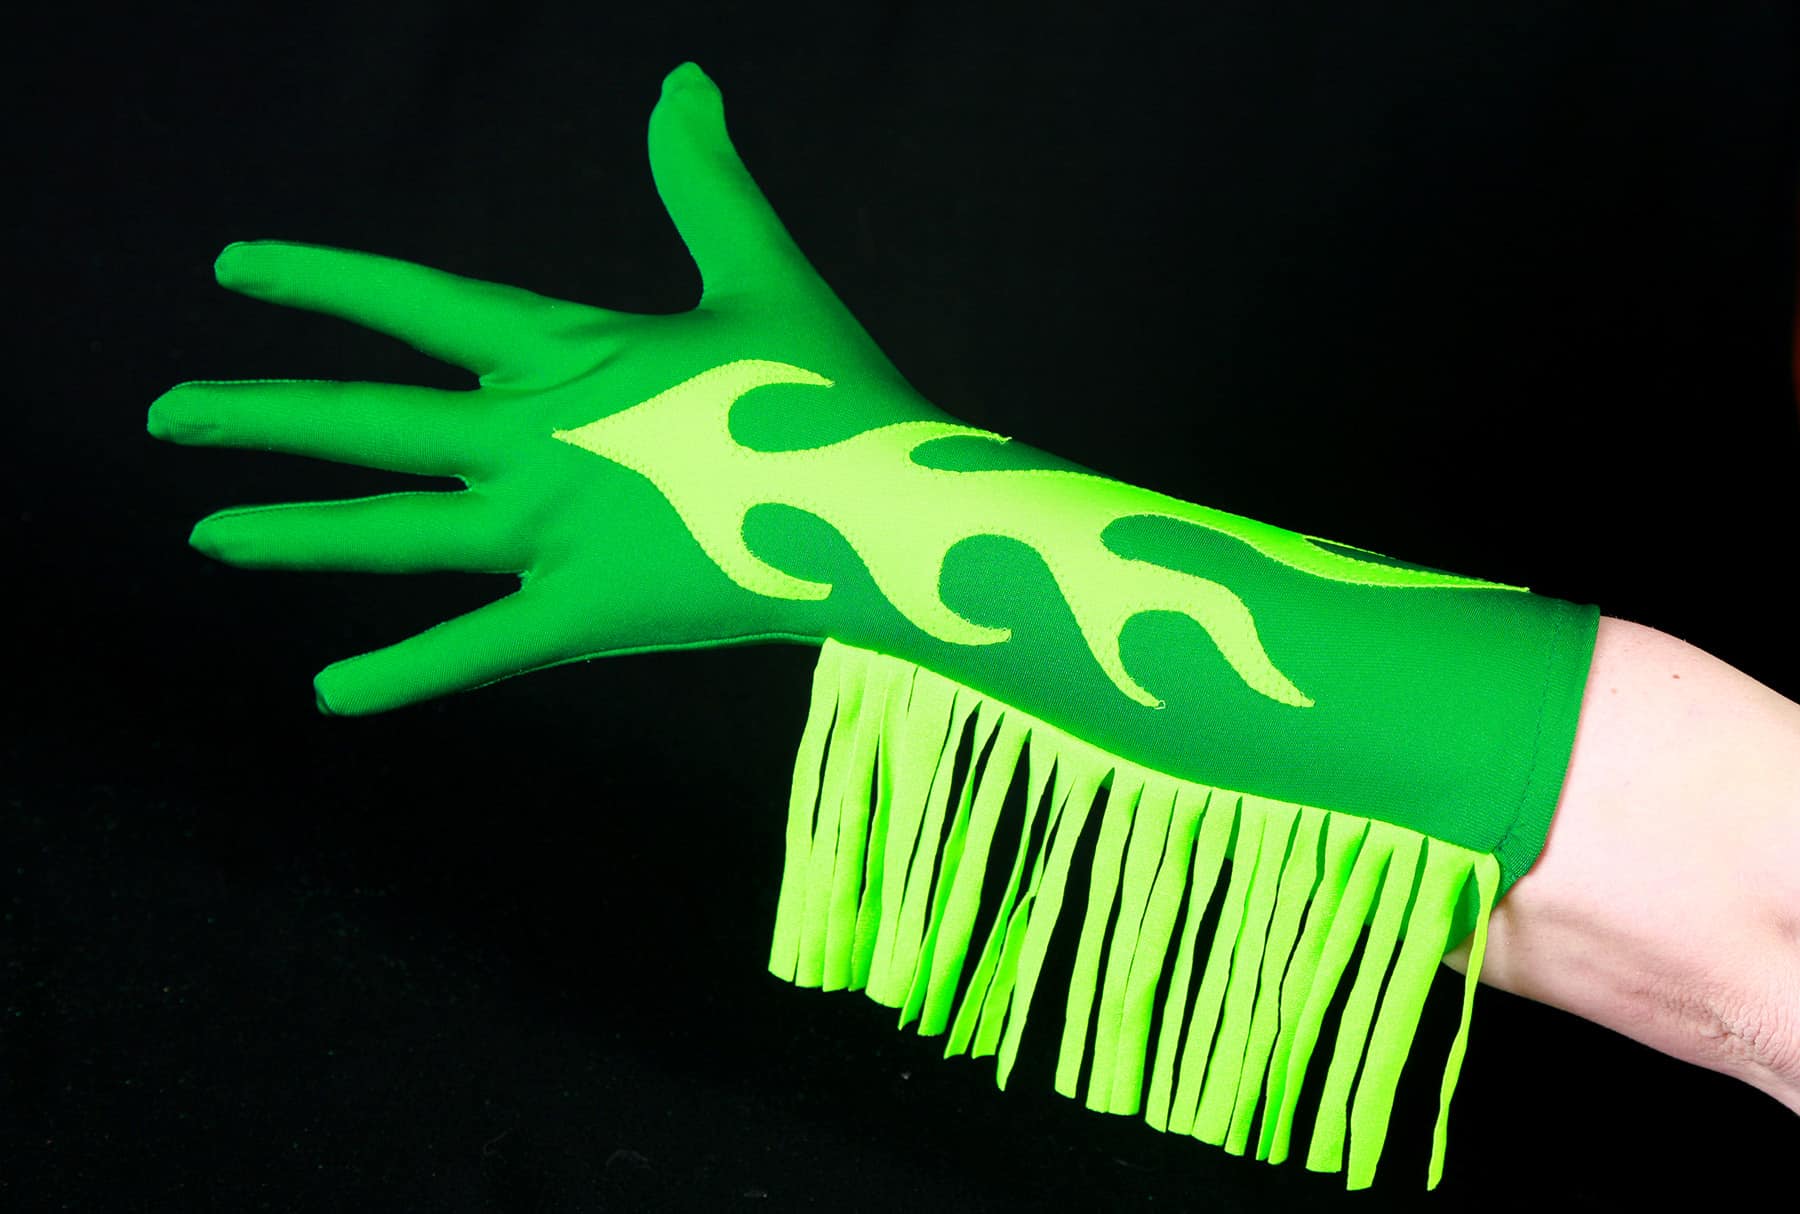 A dark green glove with bright green finge up one side, and a bright green appliqued flame design up the middle.